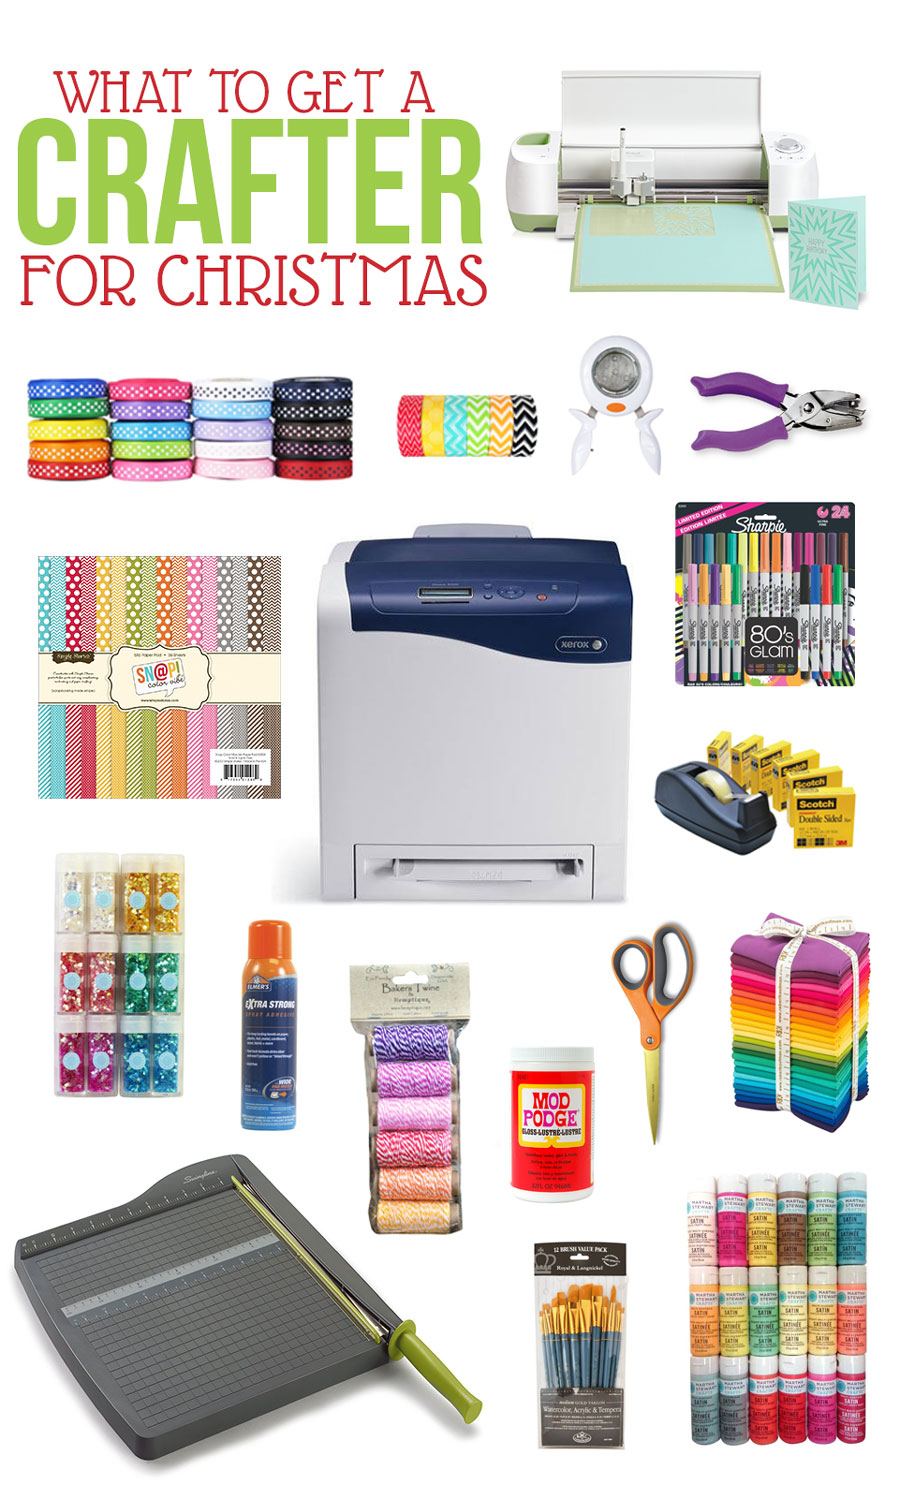 Best Gifts for Crafters 2014